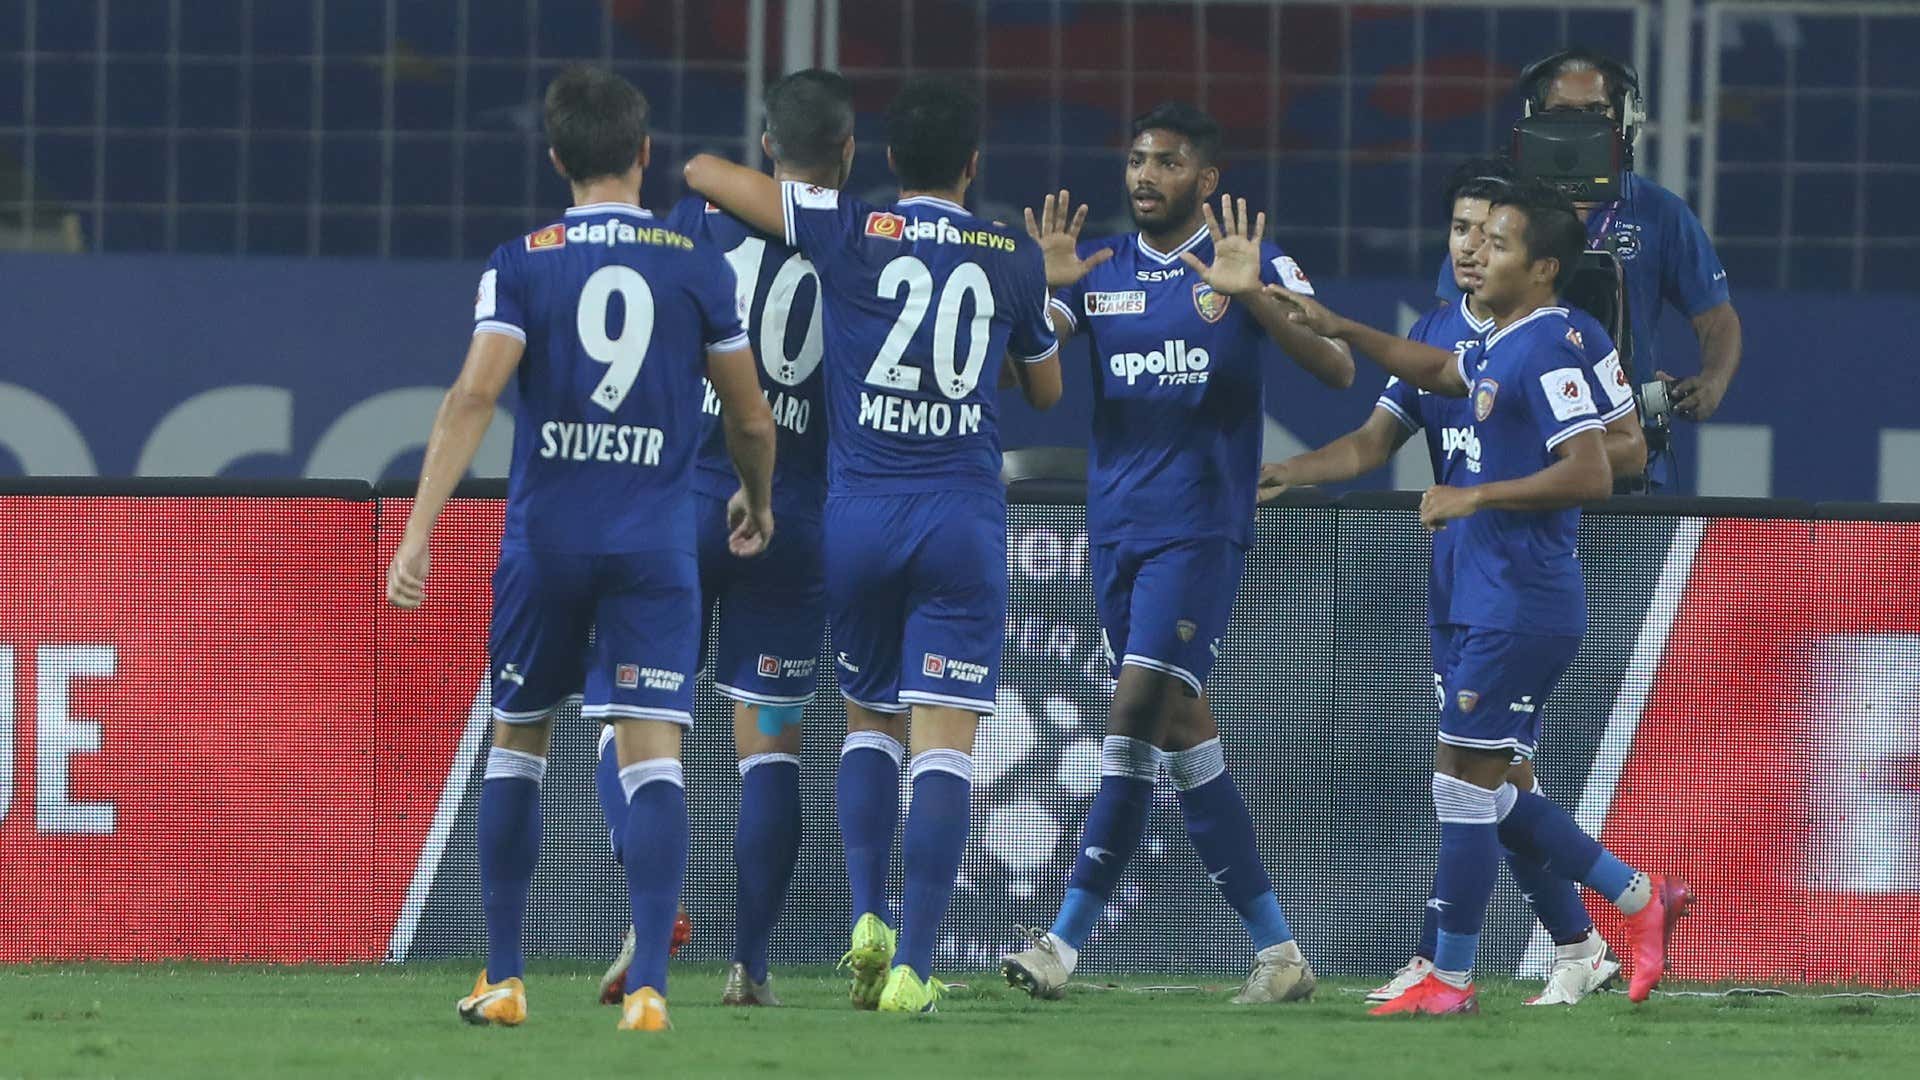 Chennaiyin FC: ISL 2021-22 fixtures, squad, strengths, weaknesses and star players